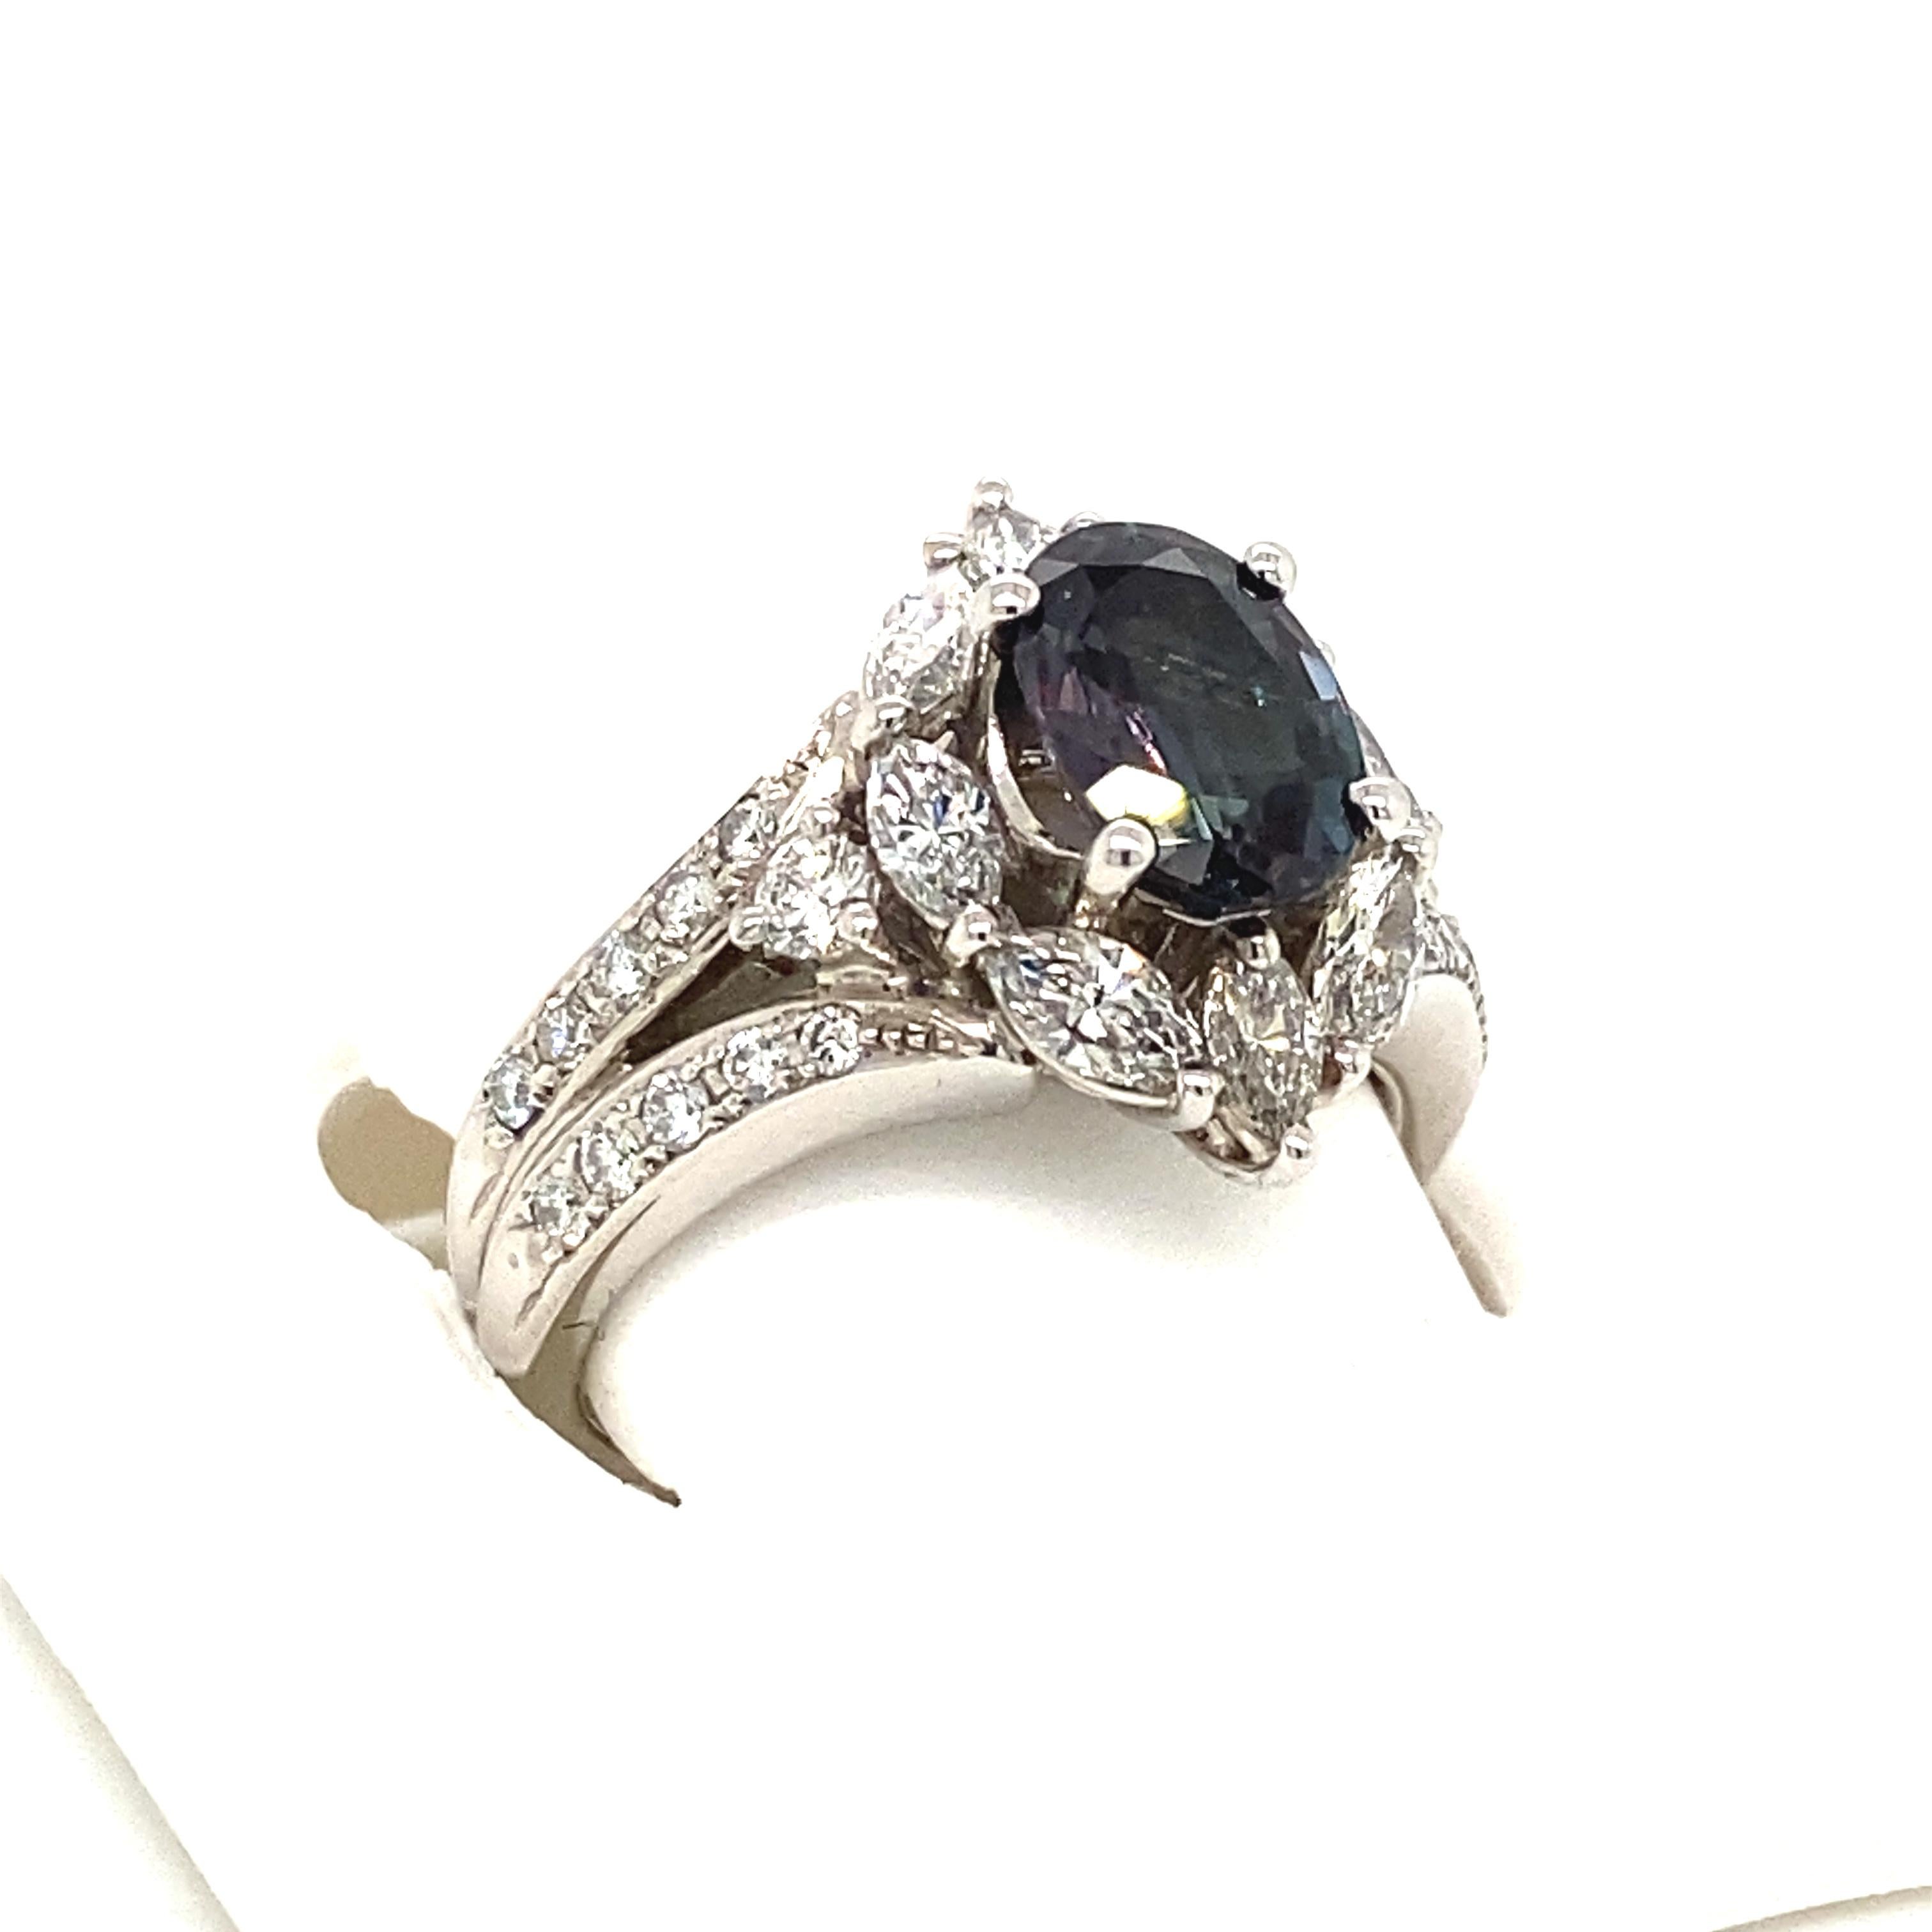 This is a gorgeous natural AAA quality oval Alexandrite surrounded by dainty diamonds that is set in a vintage platinum setting. This ring features a natural 1.74 carat brazillian oval alexandrite that is certified by the Gemological Institute of